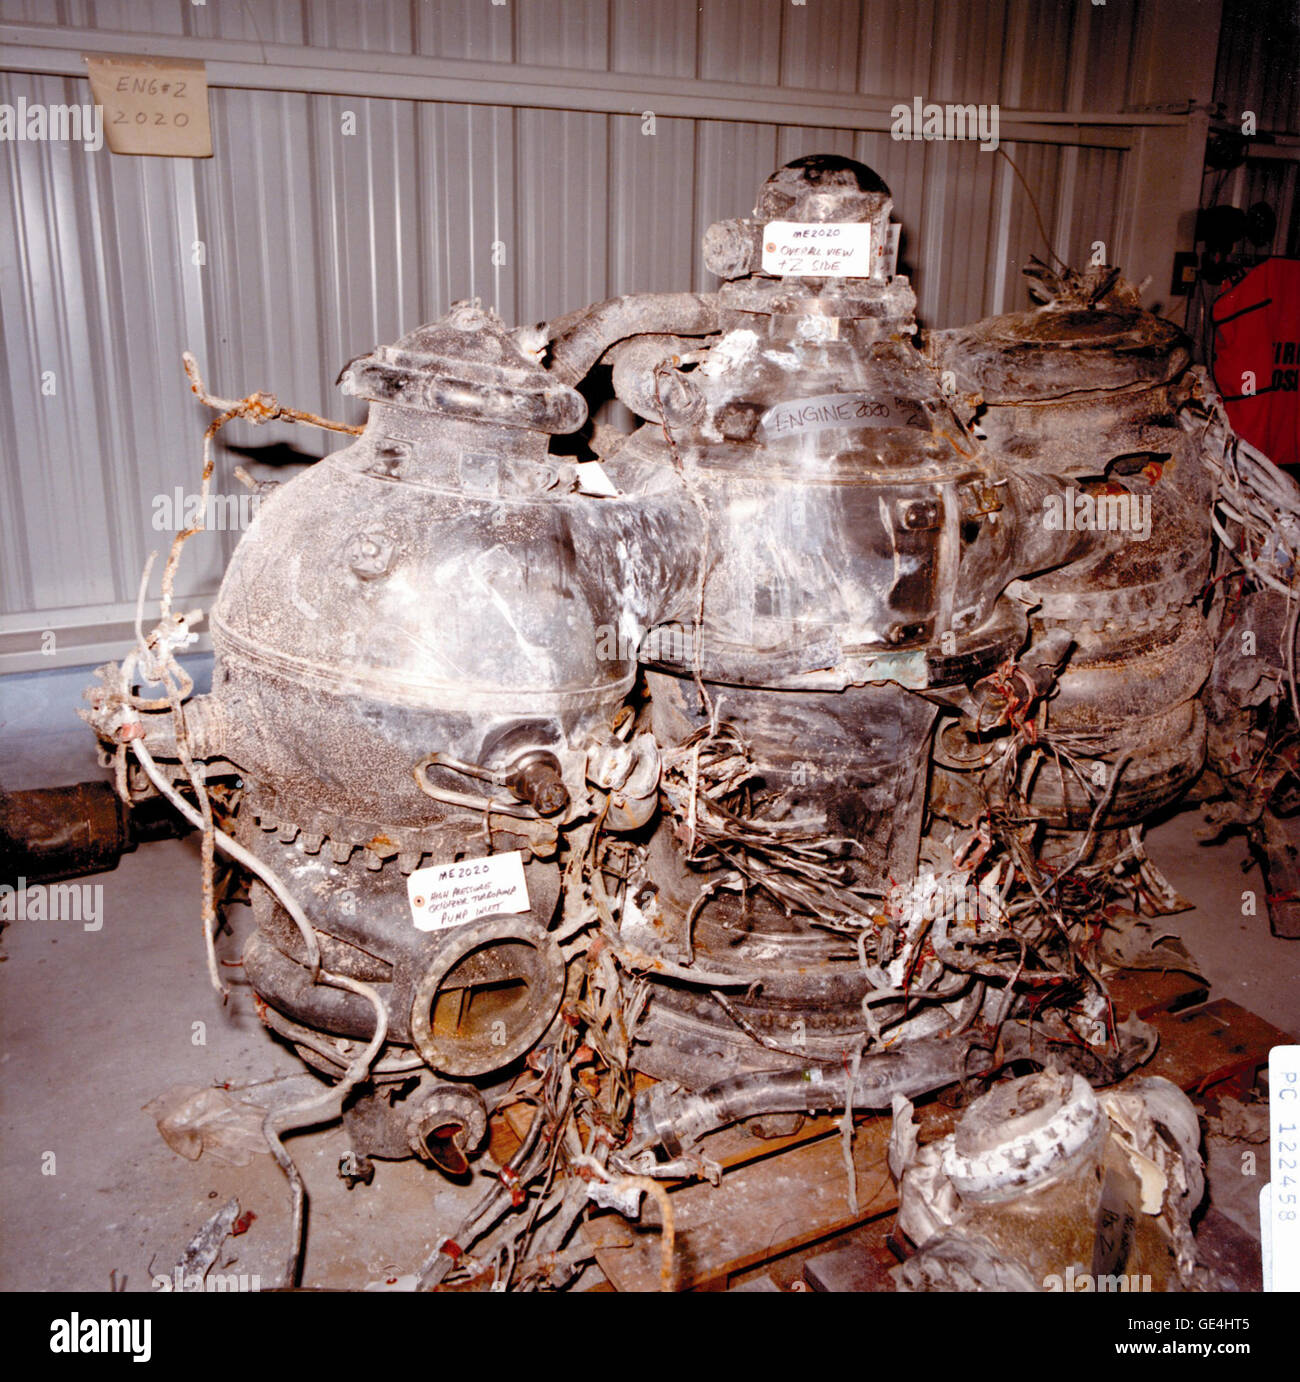 On January 28, 1986, the Space Shuttle Challenger and her seven-member crew were lost when a ruptured O-ring in the right Solid Rocket Booster caused an explosion soon after launch. Search and recovery teams lifted the Space Shuttle Main Engines (SSME) from the ocean after the accident and brought them to a storage building in Kennedy Space Center's Complex 39. Although impact with the ocean damaged some valves, the positions of others suggest that the SSME continued to operate until the orbiter breakup and thus played no part in initiating the explosion.   Image #:  Date: March 6, 1986 Stock Photo